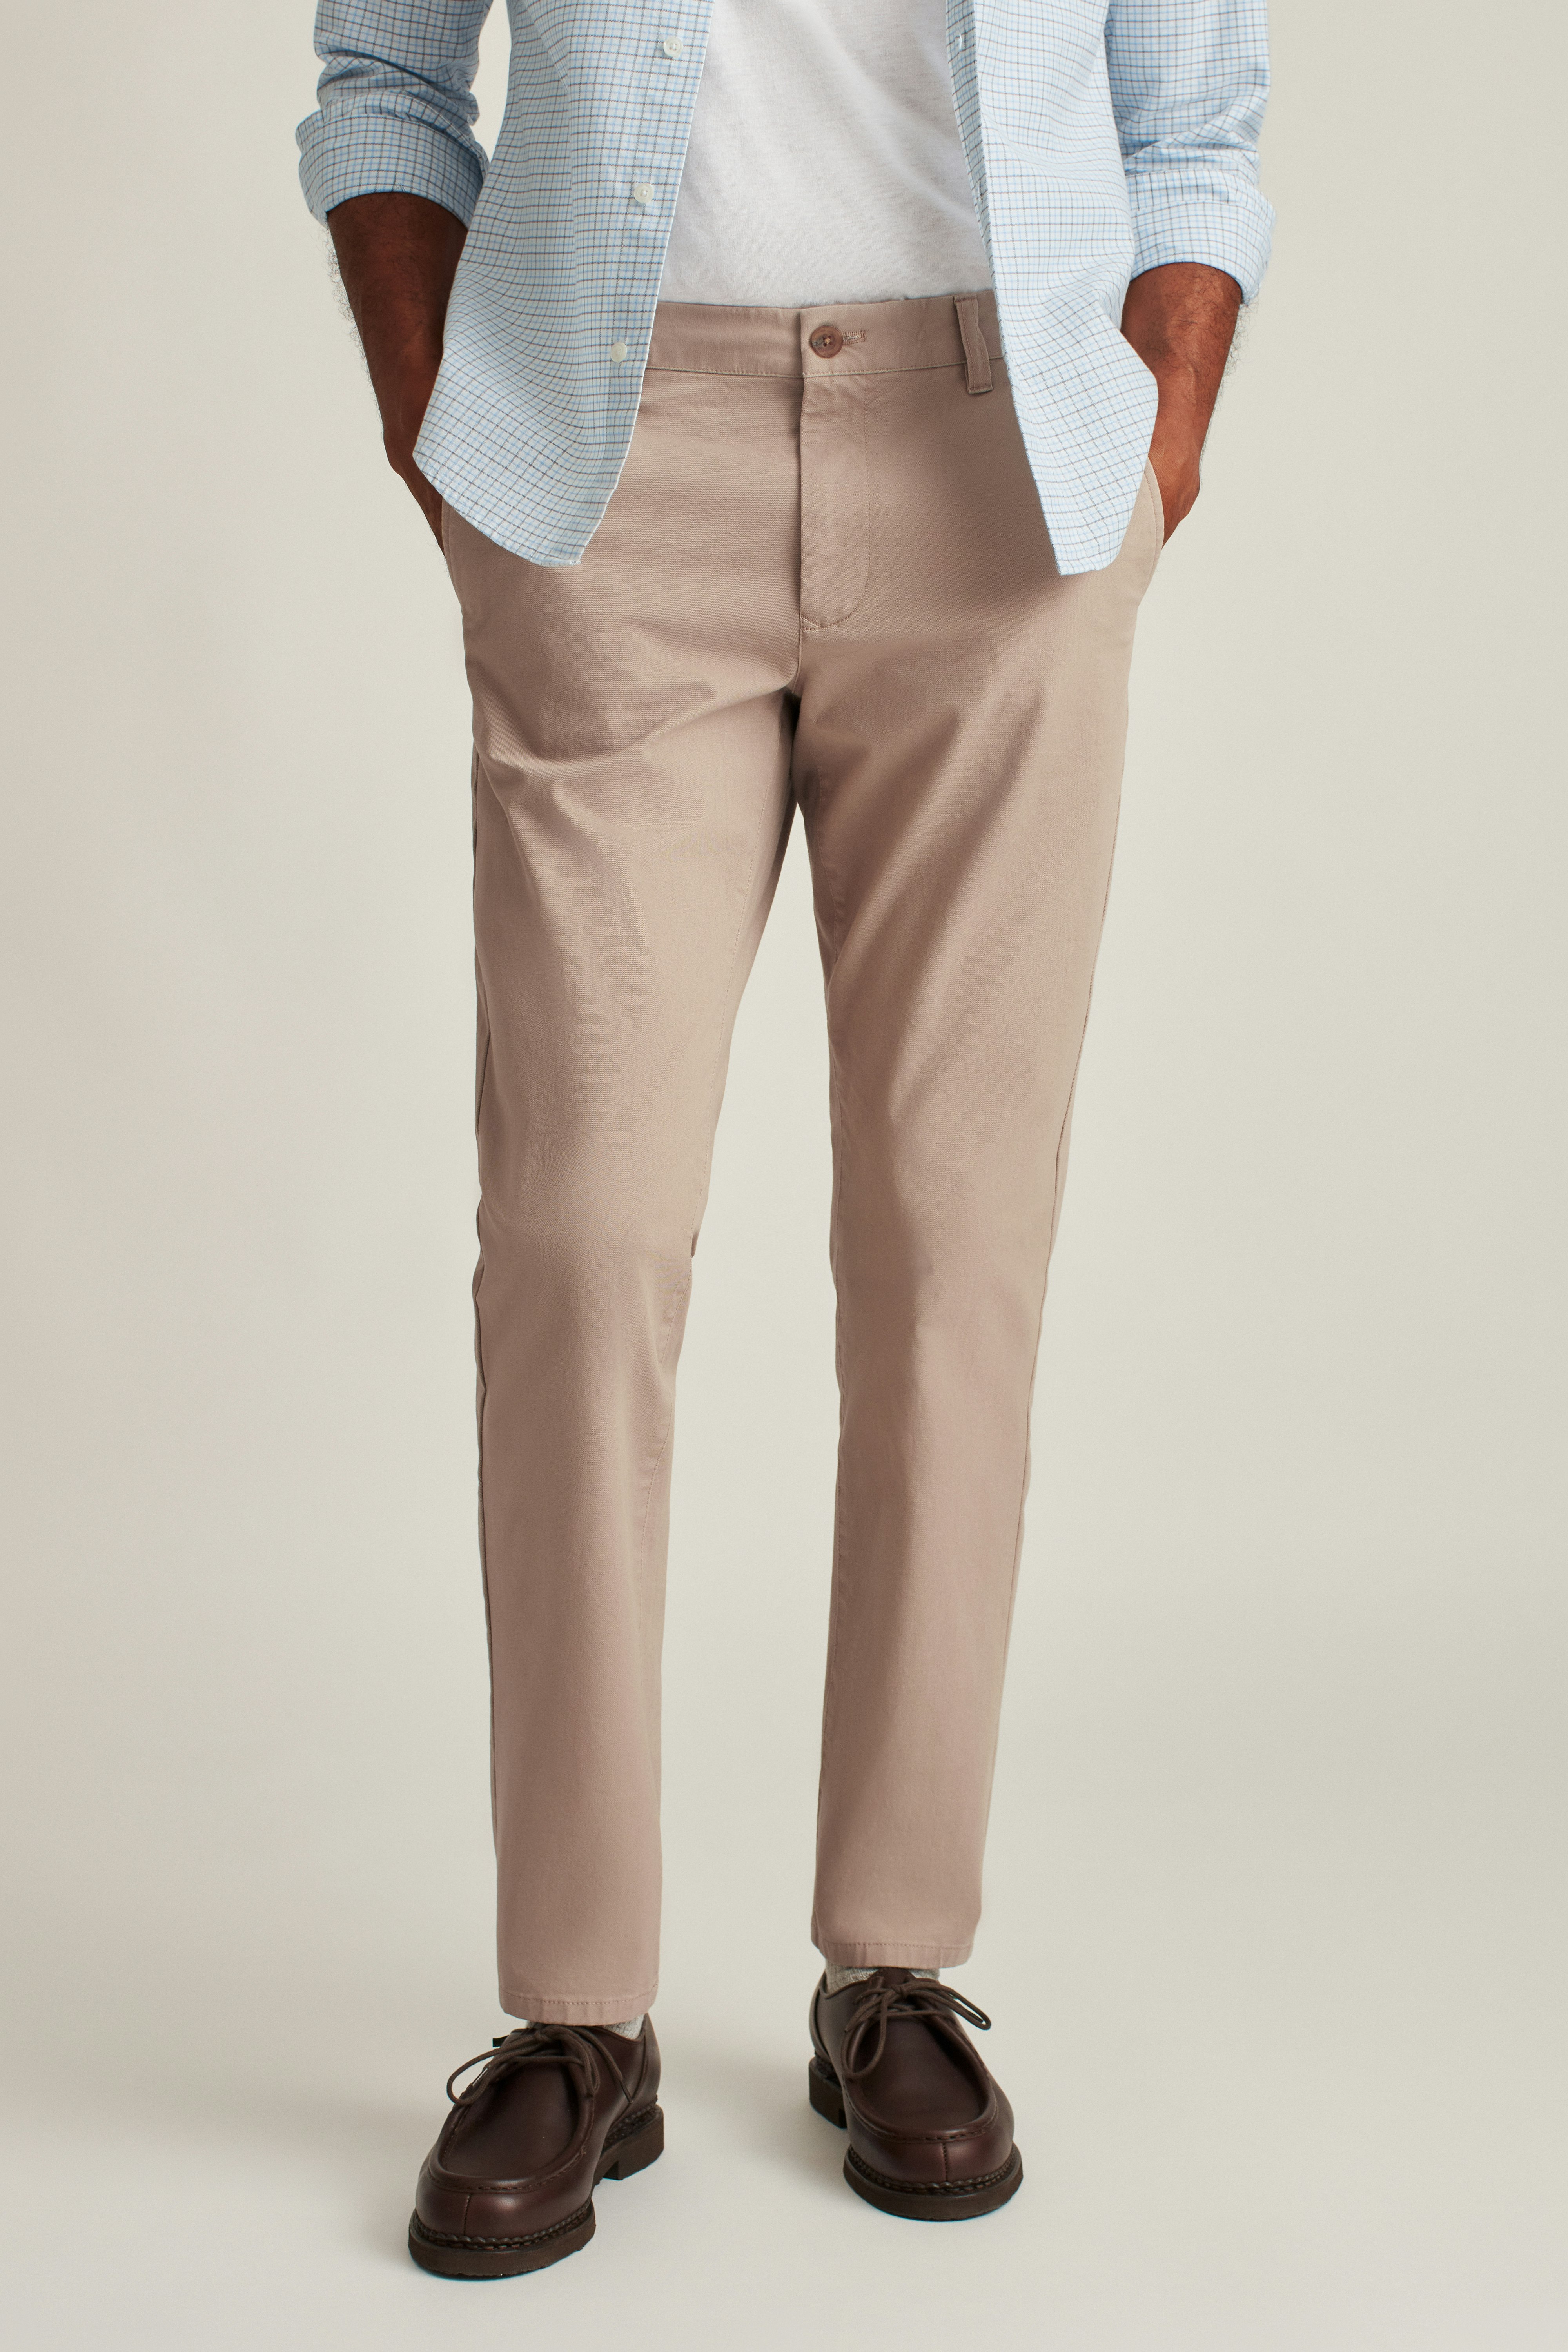 light grey pants, a white shirt is an easy and stylish combo | Mens  outfits, Mens fashion, Stylish formal